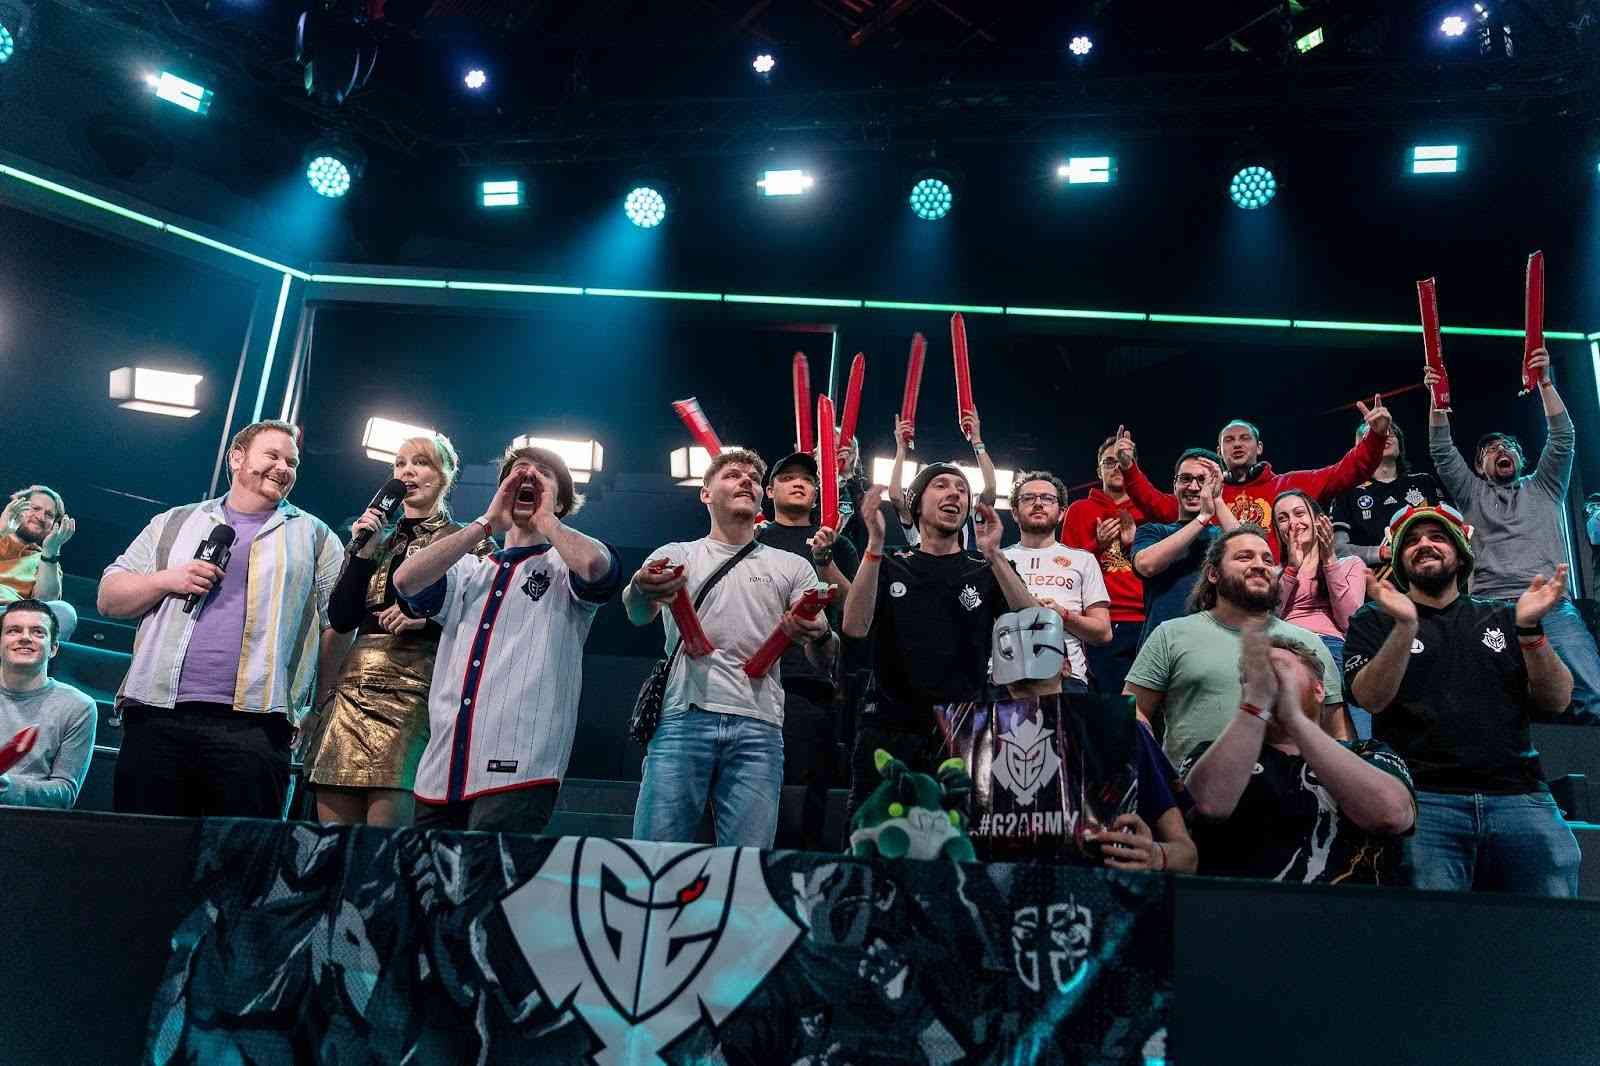 G2 fans, almost as dominating in fanfare as G2 roster is dominating in the Rift. Image by Wojciech Wandzel/Riot Games